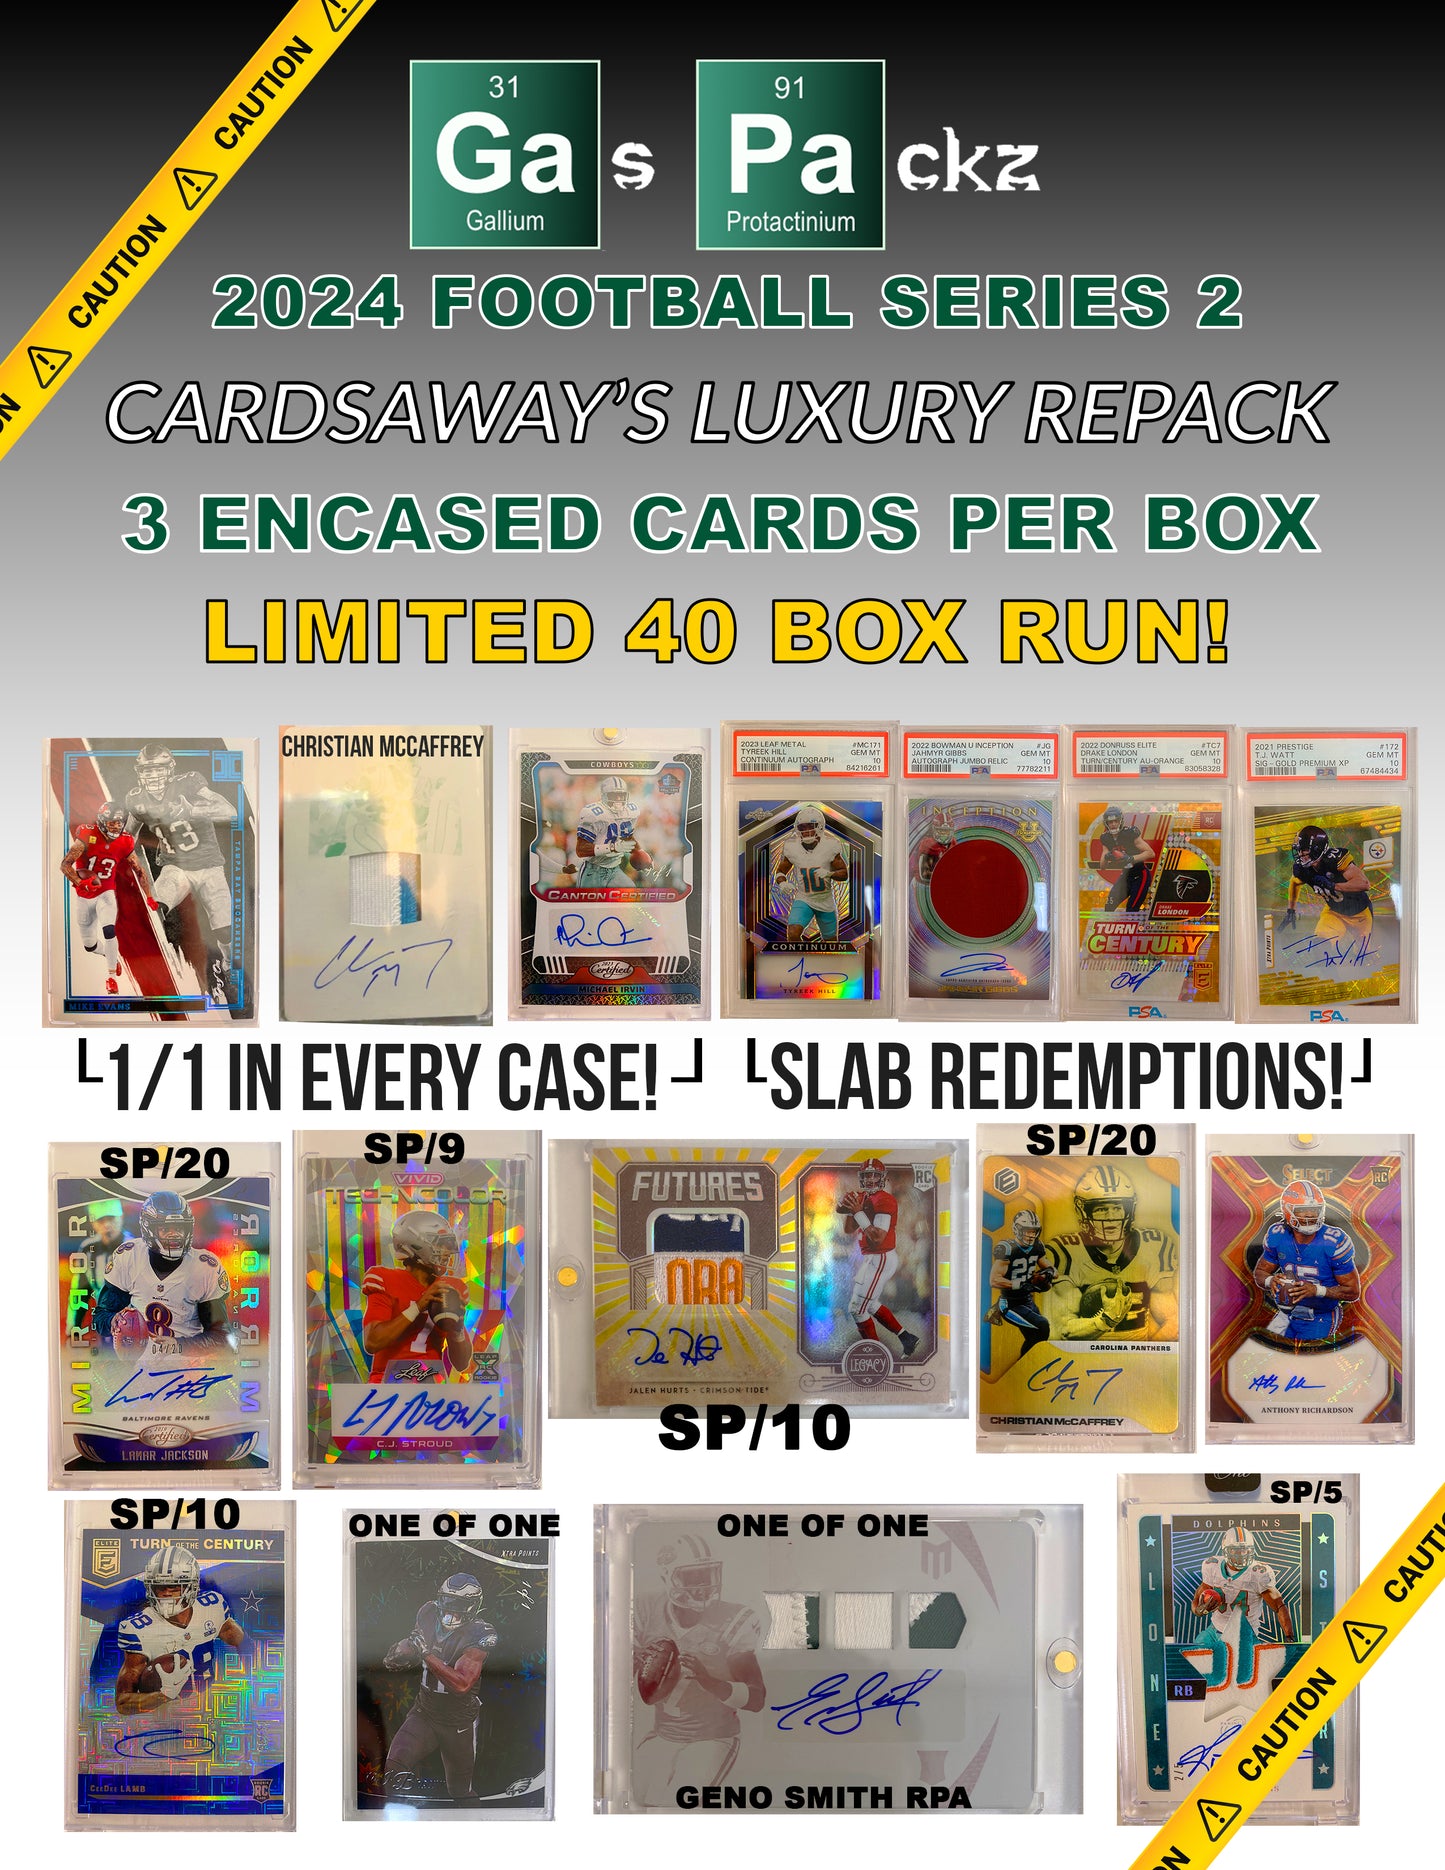 2024 GAS PACKZ FOOTBALL SERIES 2 - SOLD OUT IN 1 DAY!